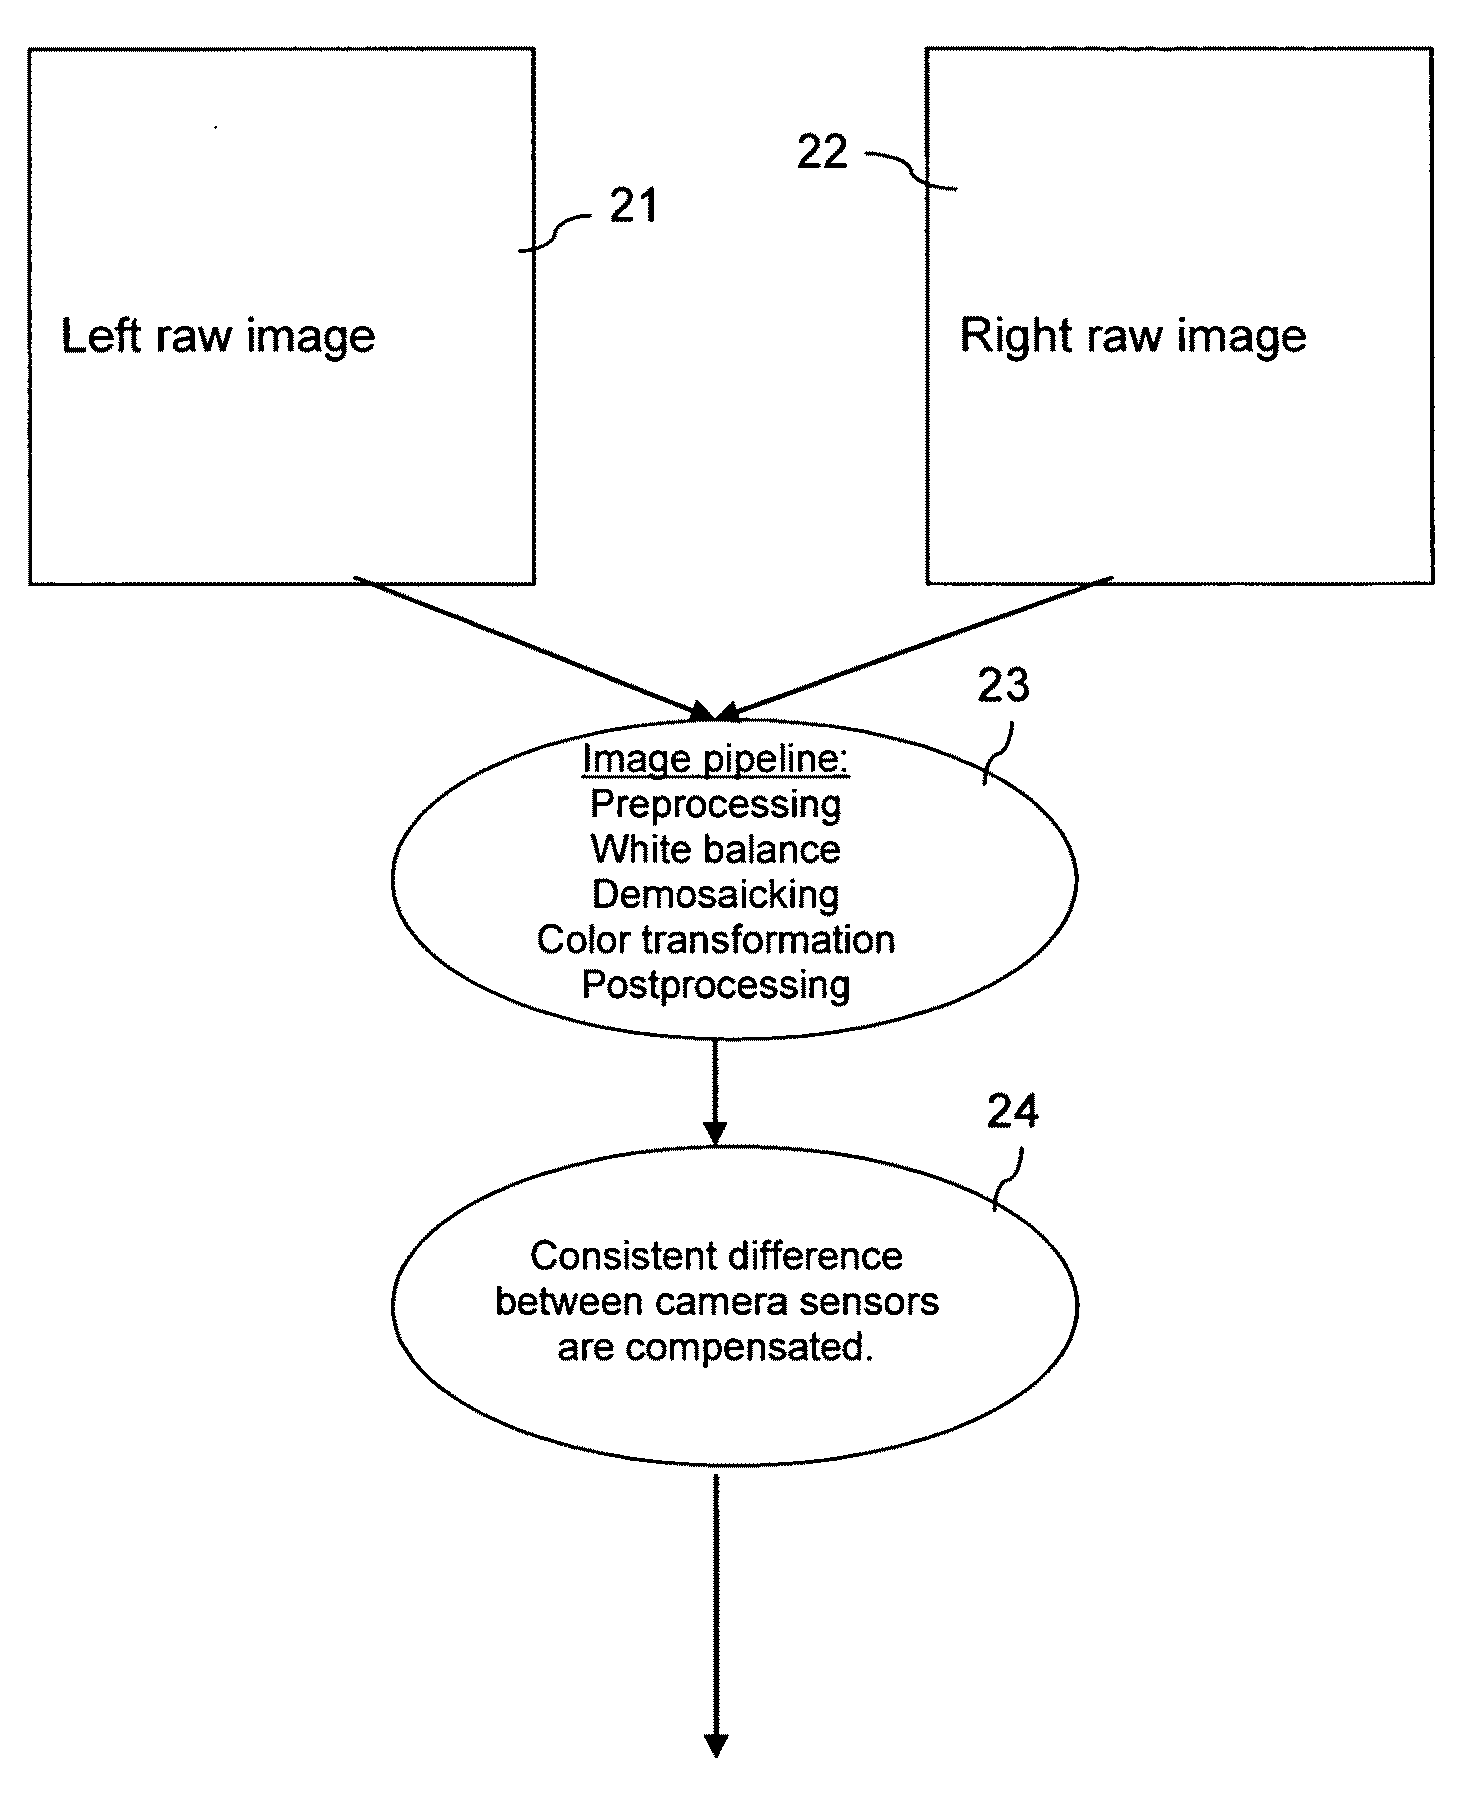 Image processing for supporting a stereoscopic presentation